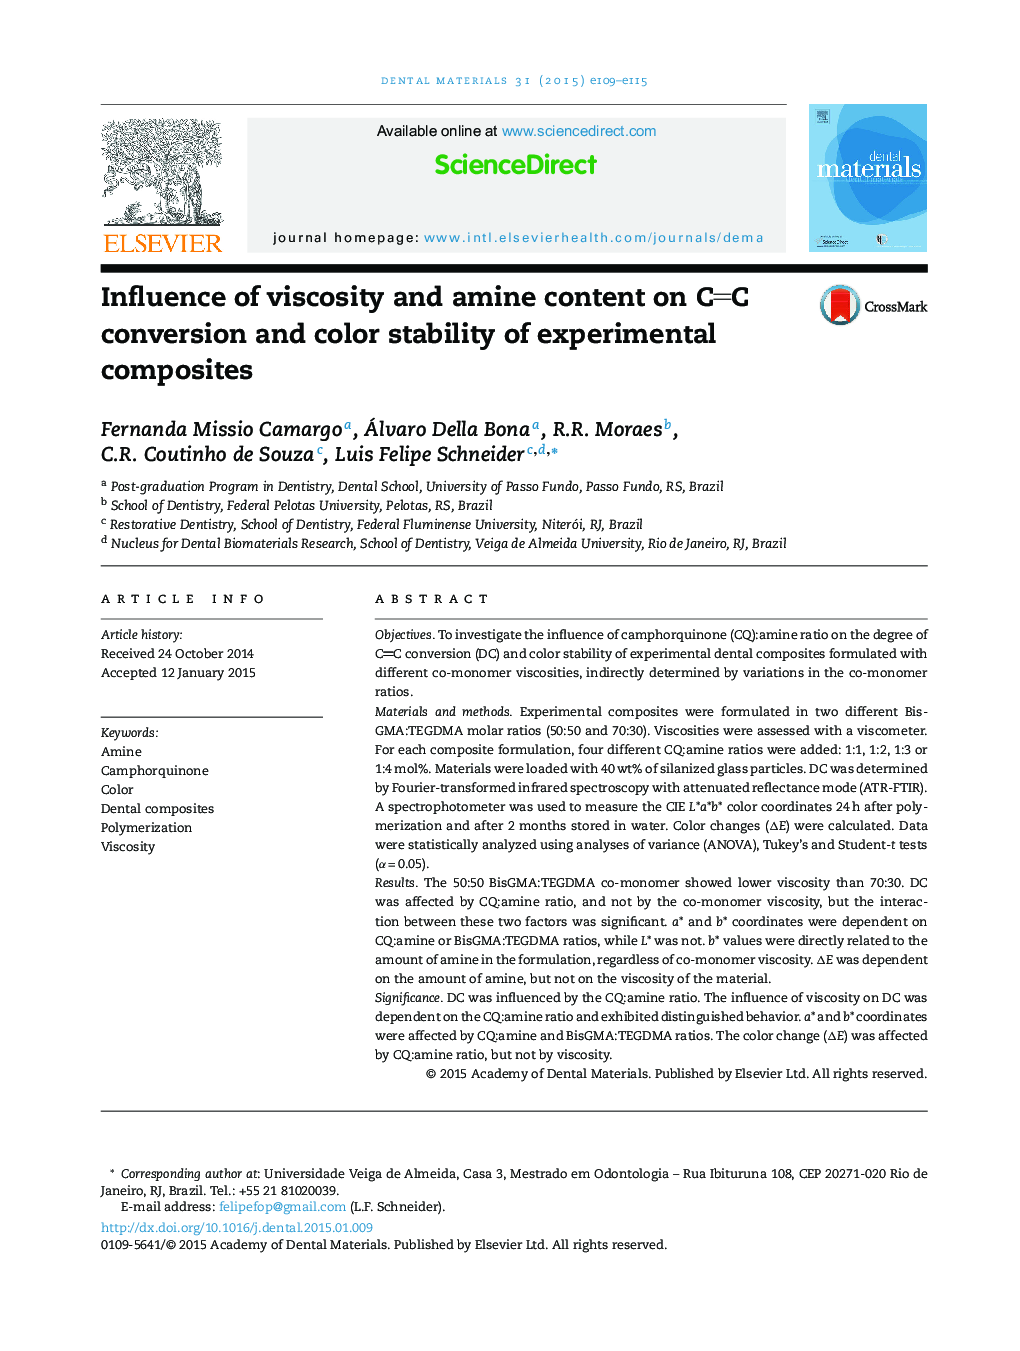 Influence of viscosity and amine content on CC conversion and color stability of experimental composites